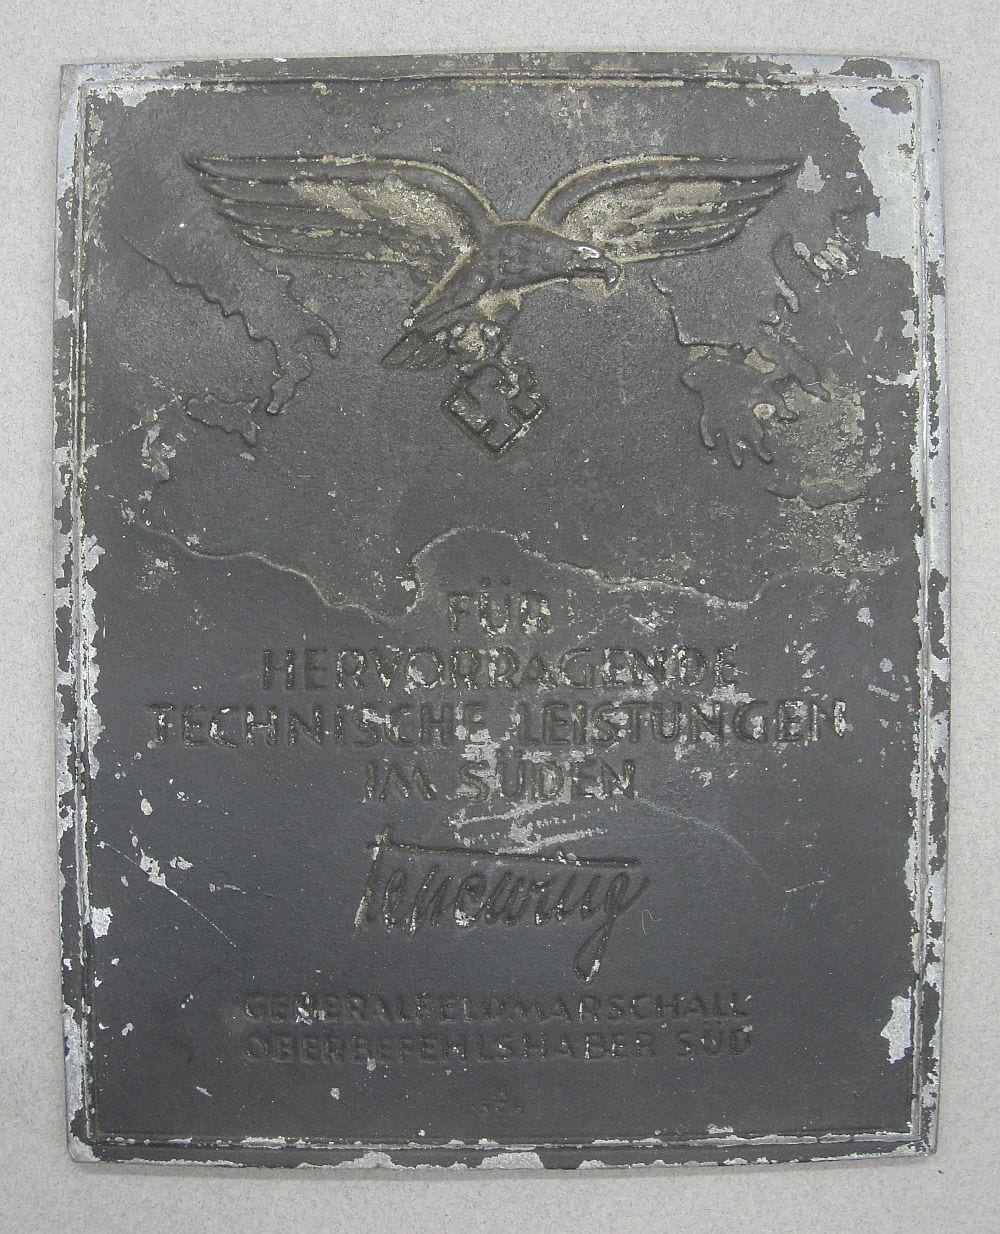 Luftwaffe Honor Plaque for Outstanding Technical Achievement in the Southern Com